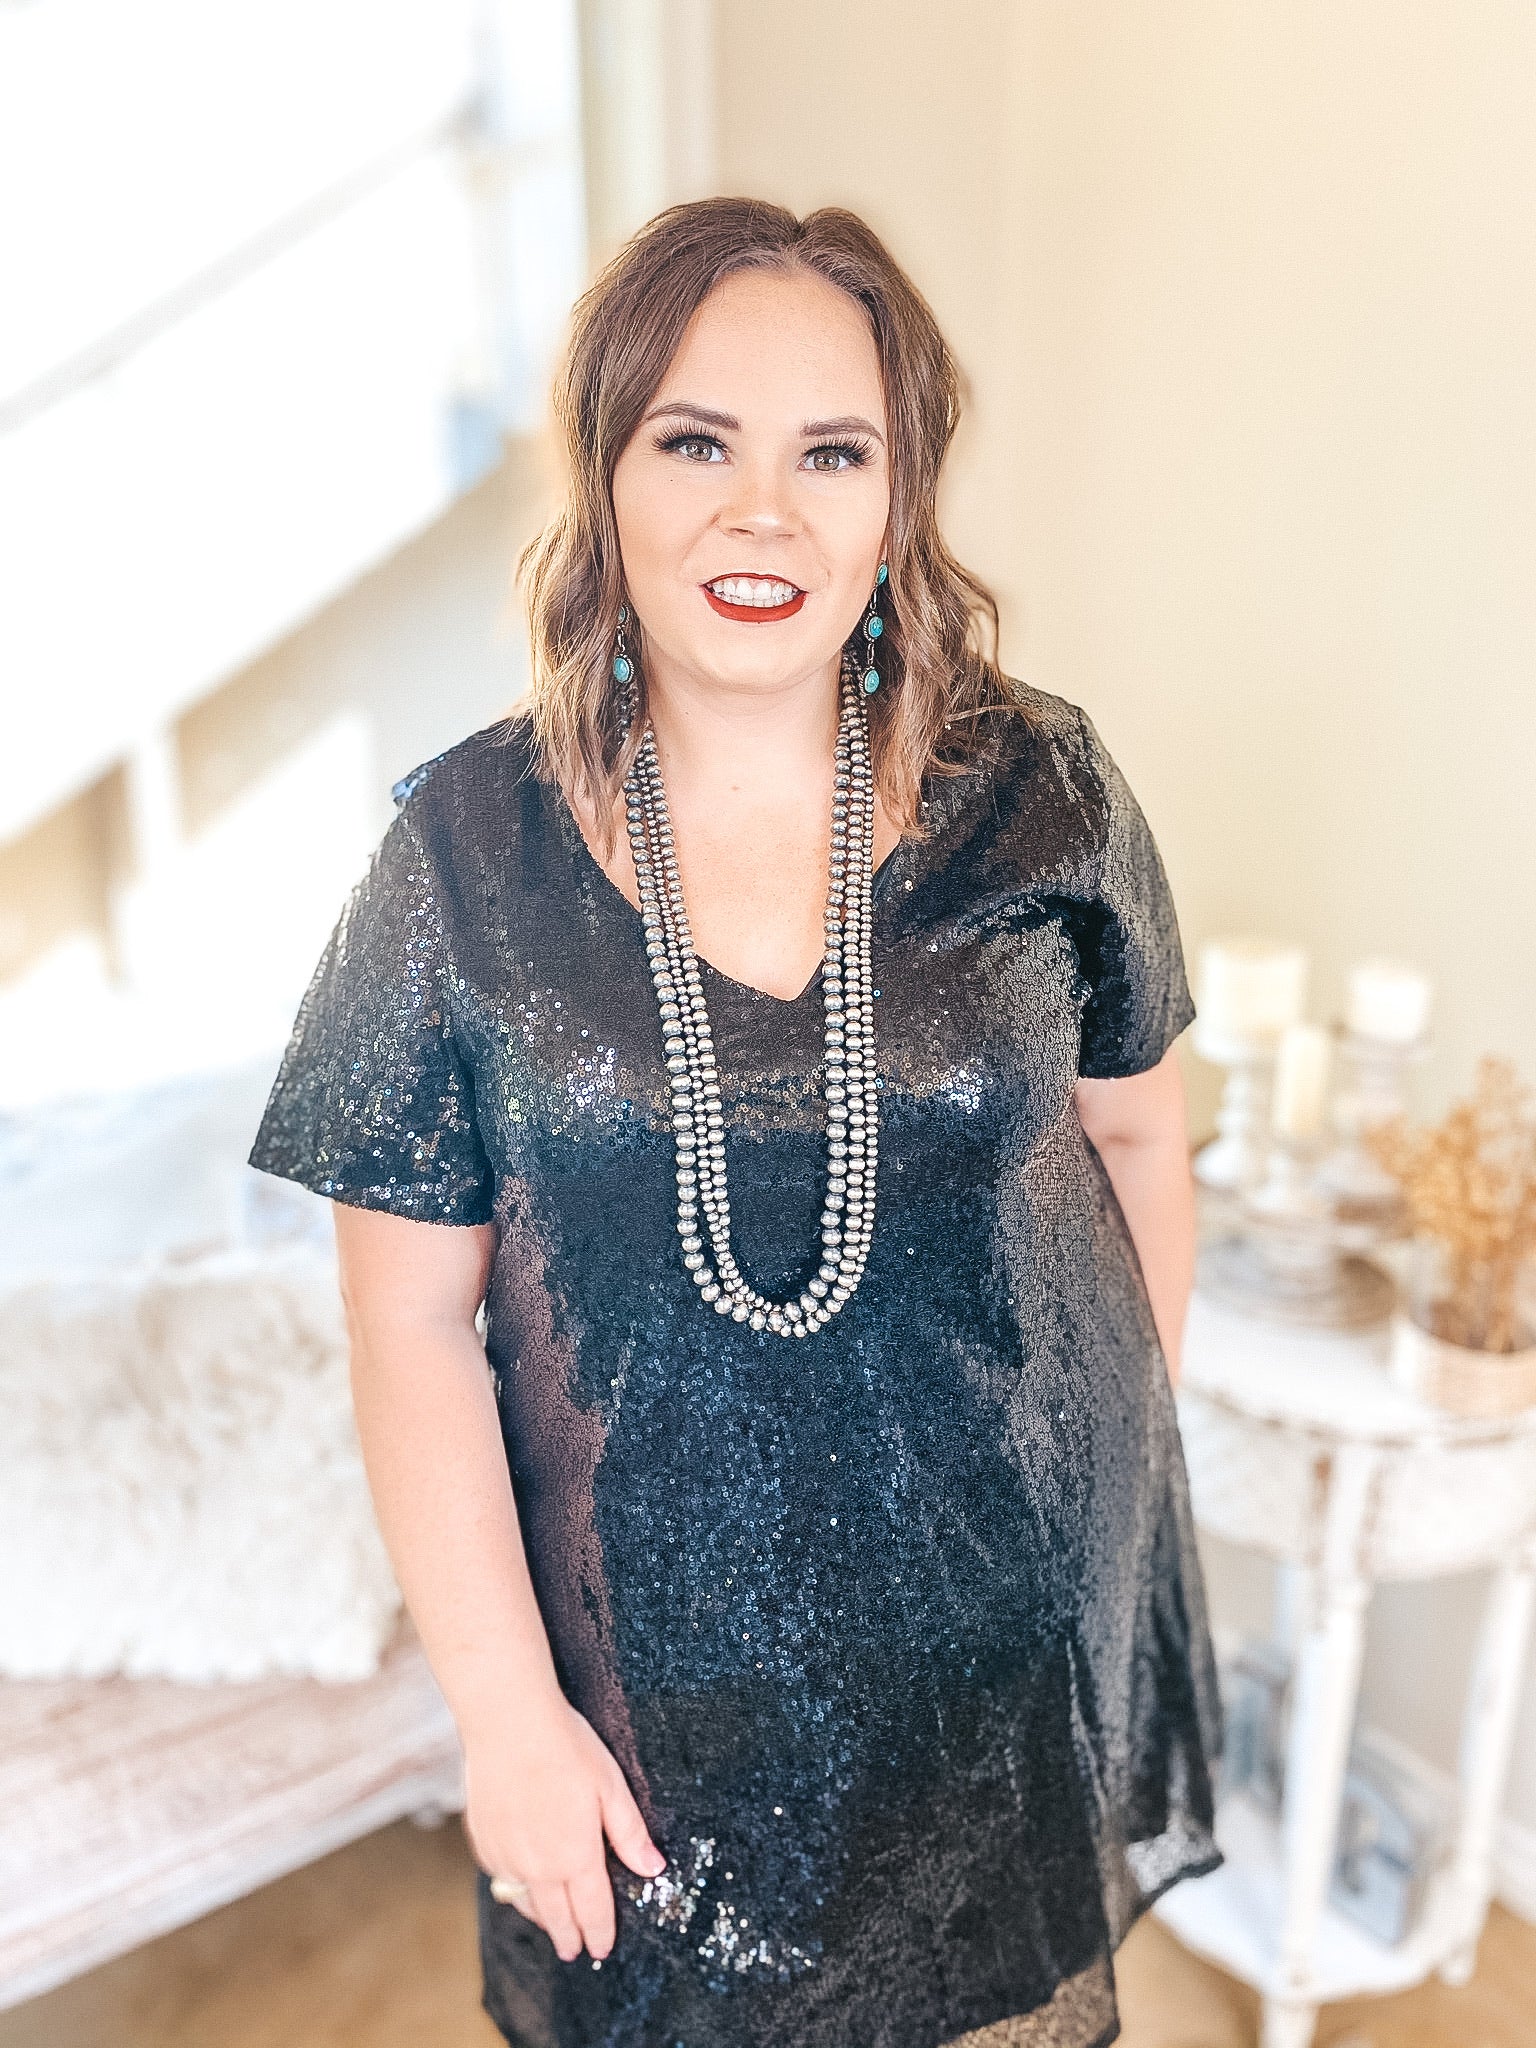 Can't Keep Up V Neck Sequin Dress with Short Sleeves in Black - Giddy Up Glamour Boutique